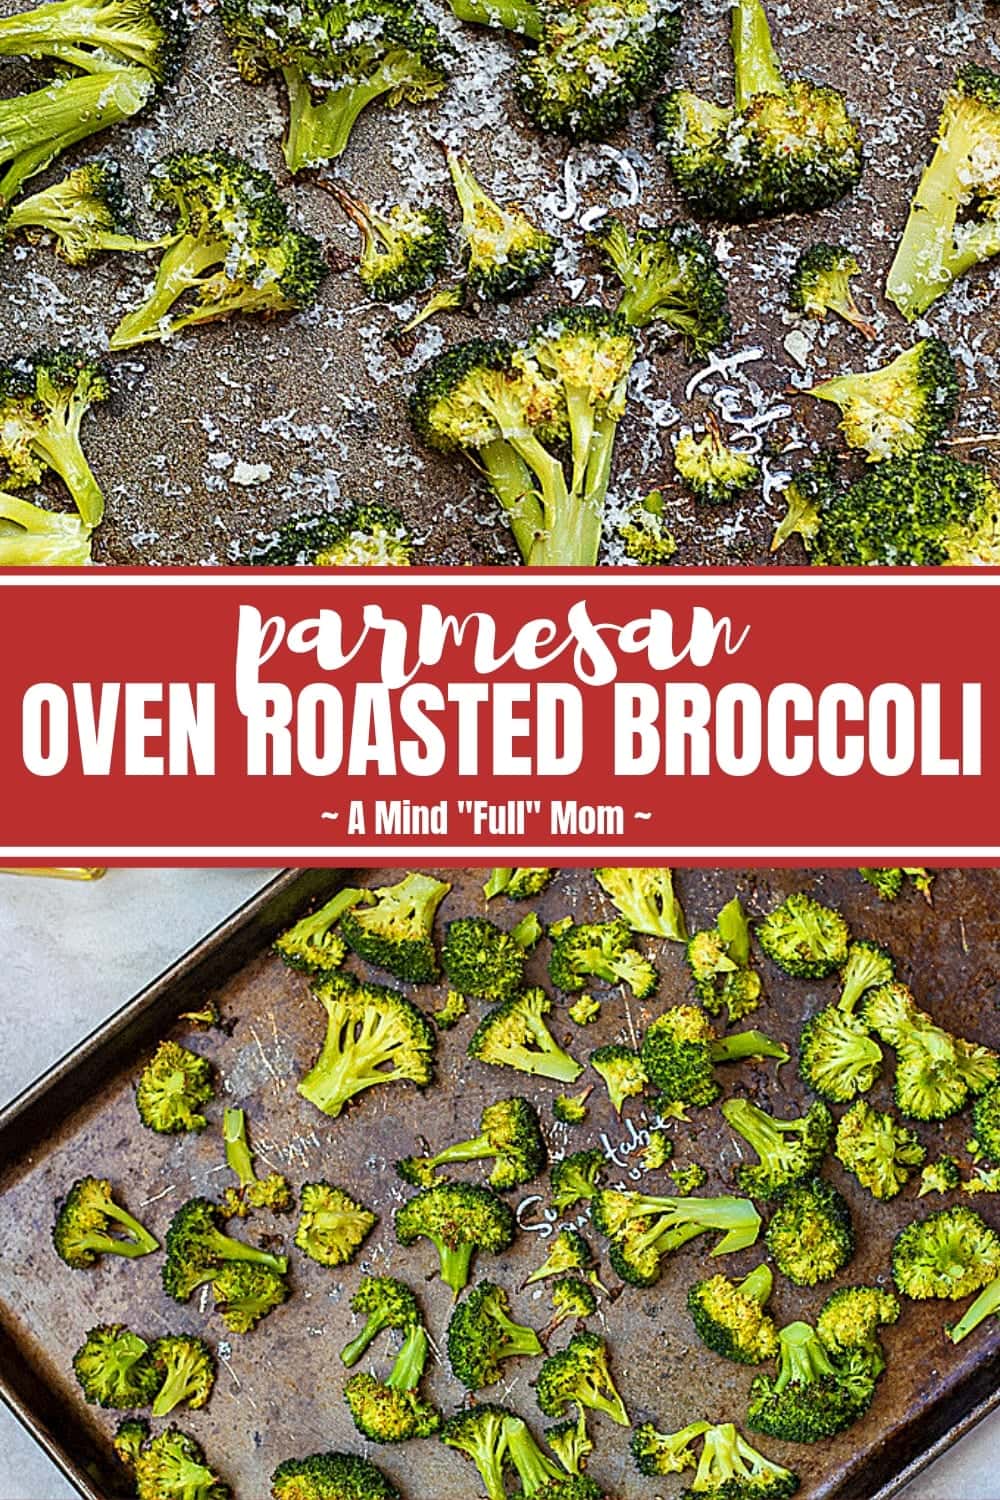 Roasted Broccoli is the BEST way to eat broccoli!! Fresh broccoli is roasted until crispy and nutty then finished with Parmesan and fresh lemon for an amazing and easy side dish. From the crispy edges to the tender interior to the nutty flavor, roasted broccoli delivers spectacular results with minimal effort.